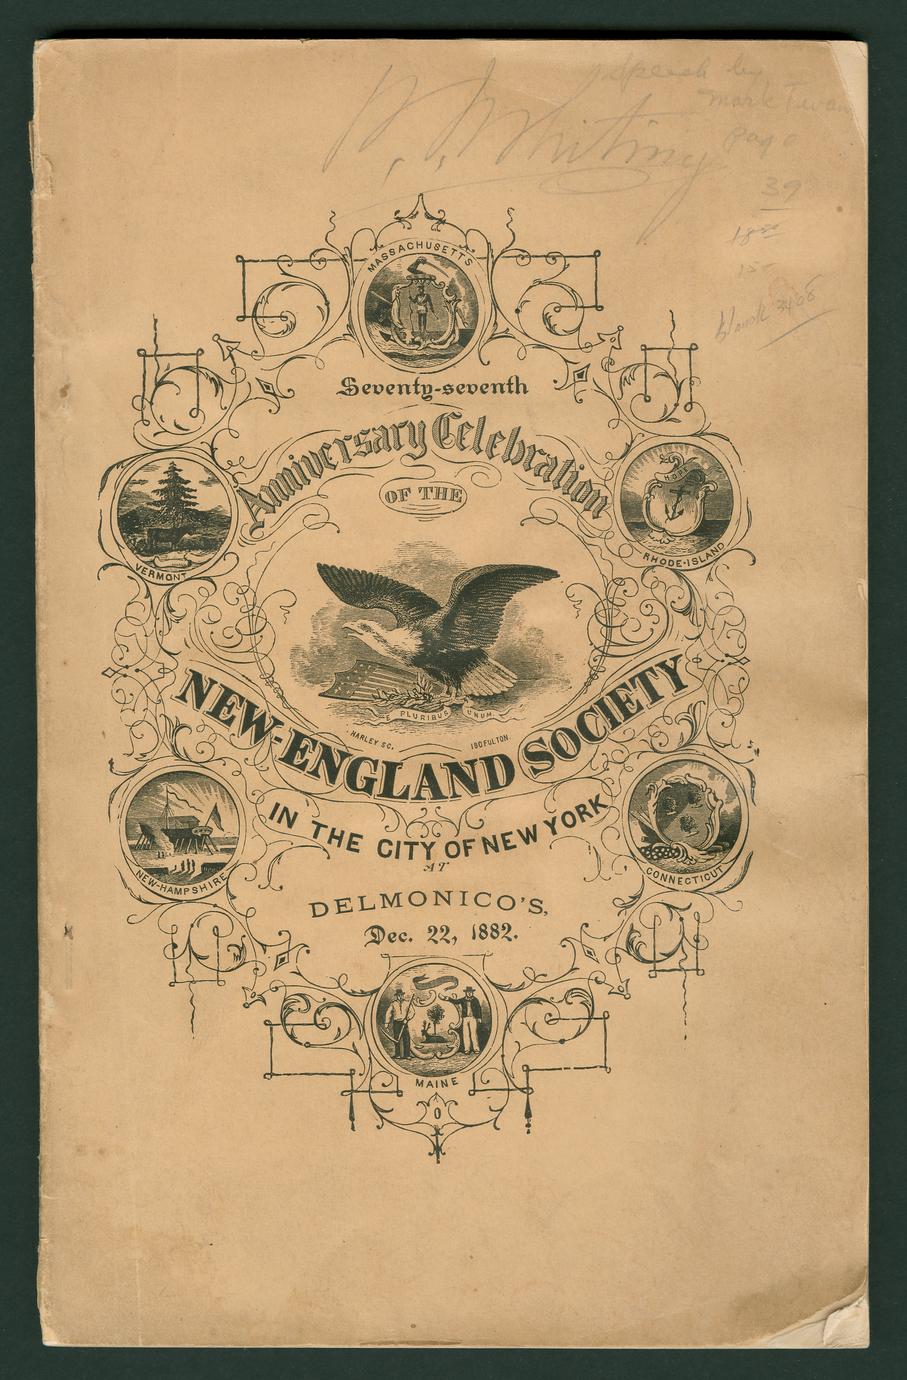 Seventy-seventh anniversary celebration of the New-England Society in the City of New York